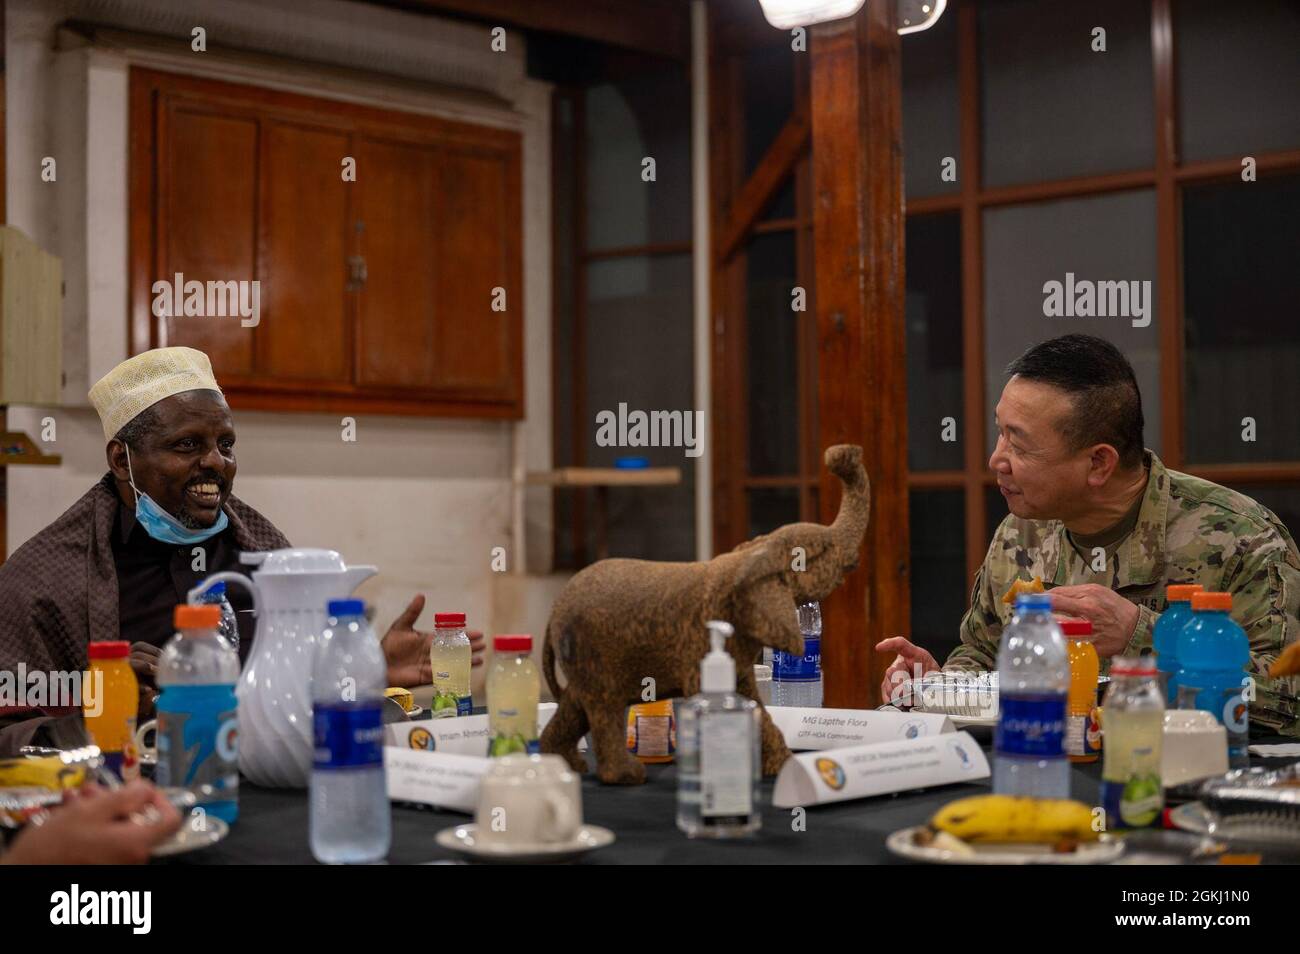 Hassan Ahmed Migane, Djiboutian Imam (left), enjoys the company of U.S. Army Maj. Gen. Lapthe C. Flora (right), commanding general, Combined Joint Task Force- Horn of Africa during an Iftar to celebrate the end of Ramadan in Djibouti, April 28, 2021. The Iftar event provided an opportunity for key partners to come together in unity, build on existing relationships, and reaffirm the importance of cross-cultural understanding. Stock Photo